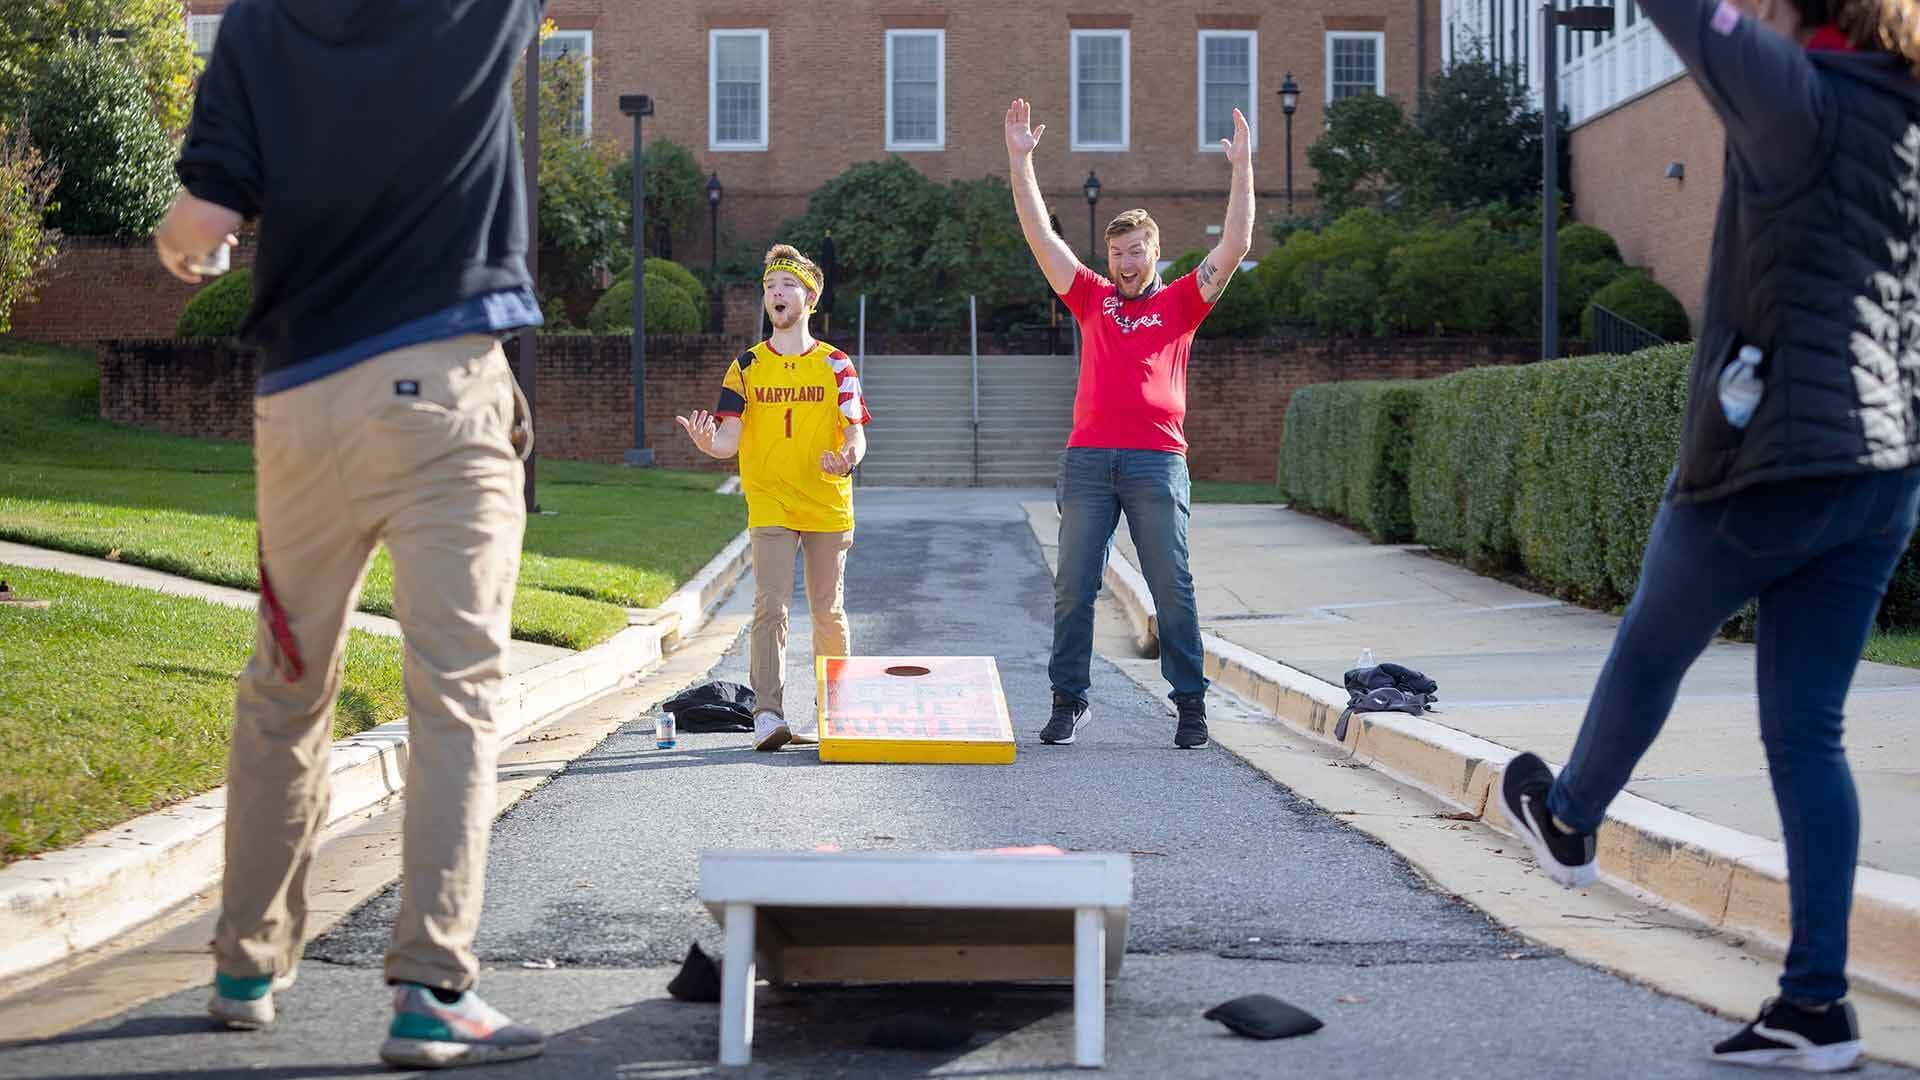 Terps play cornhole at tailgate